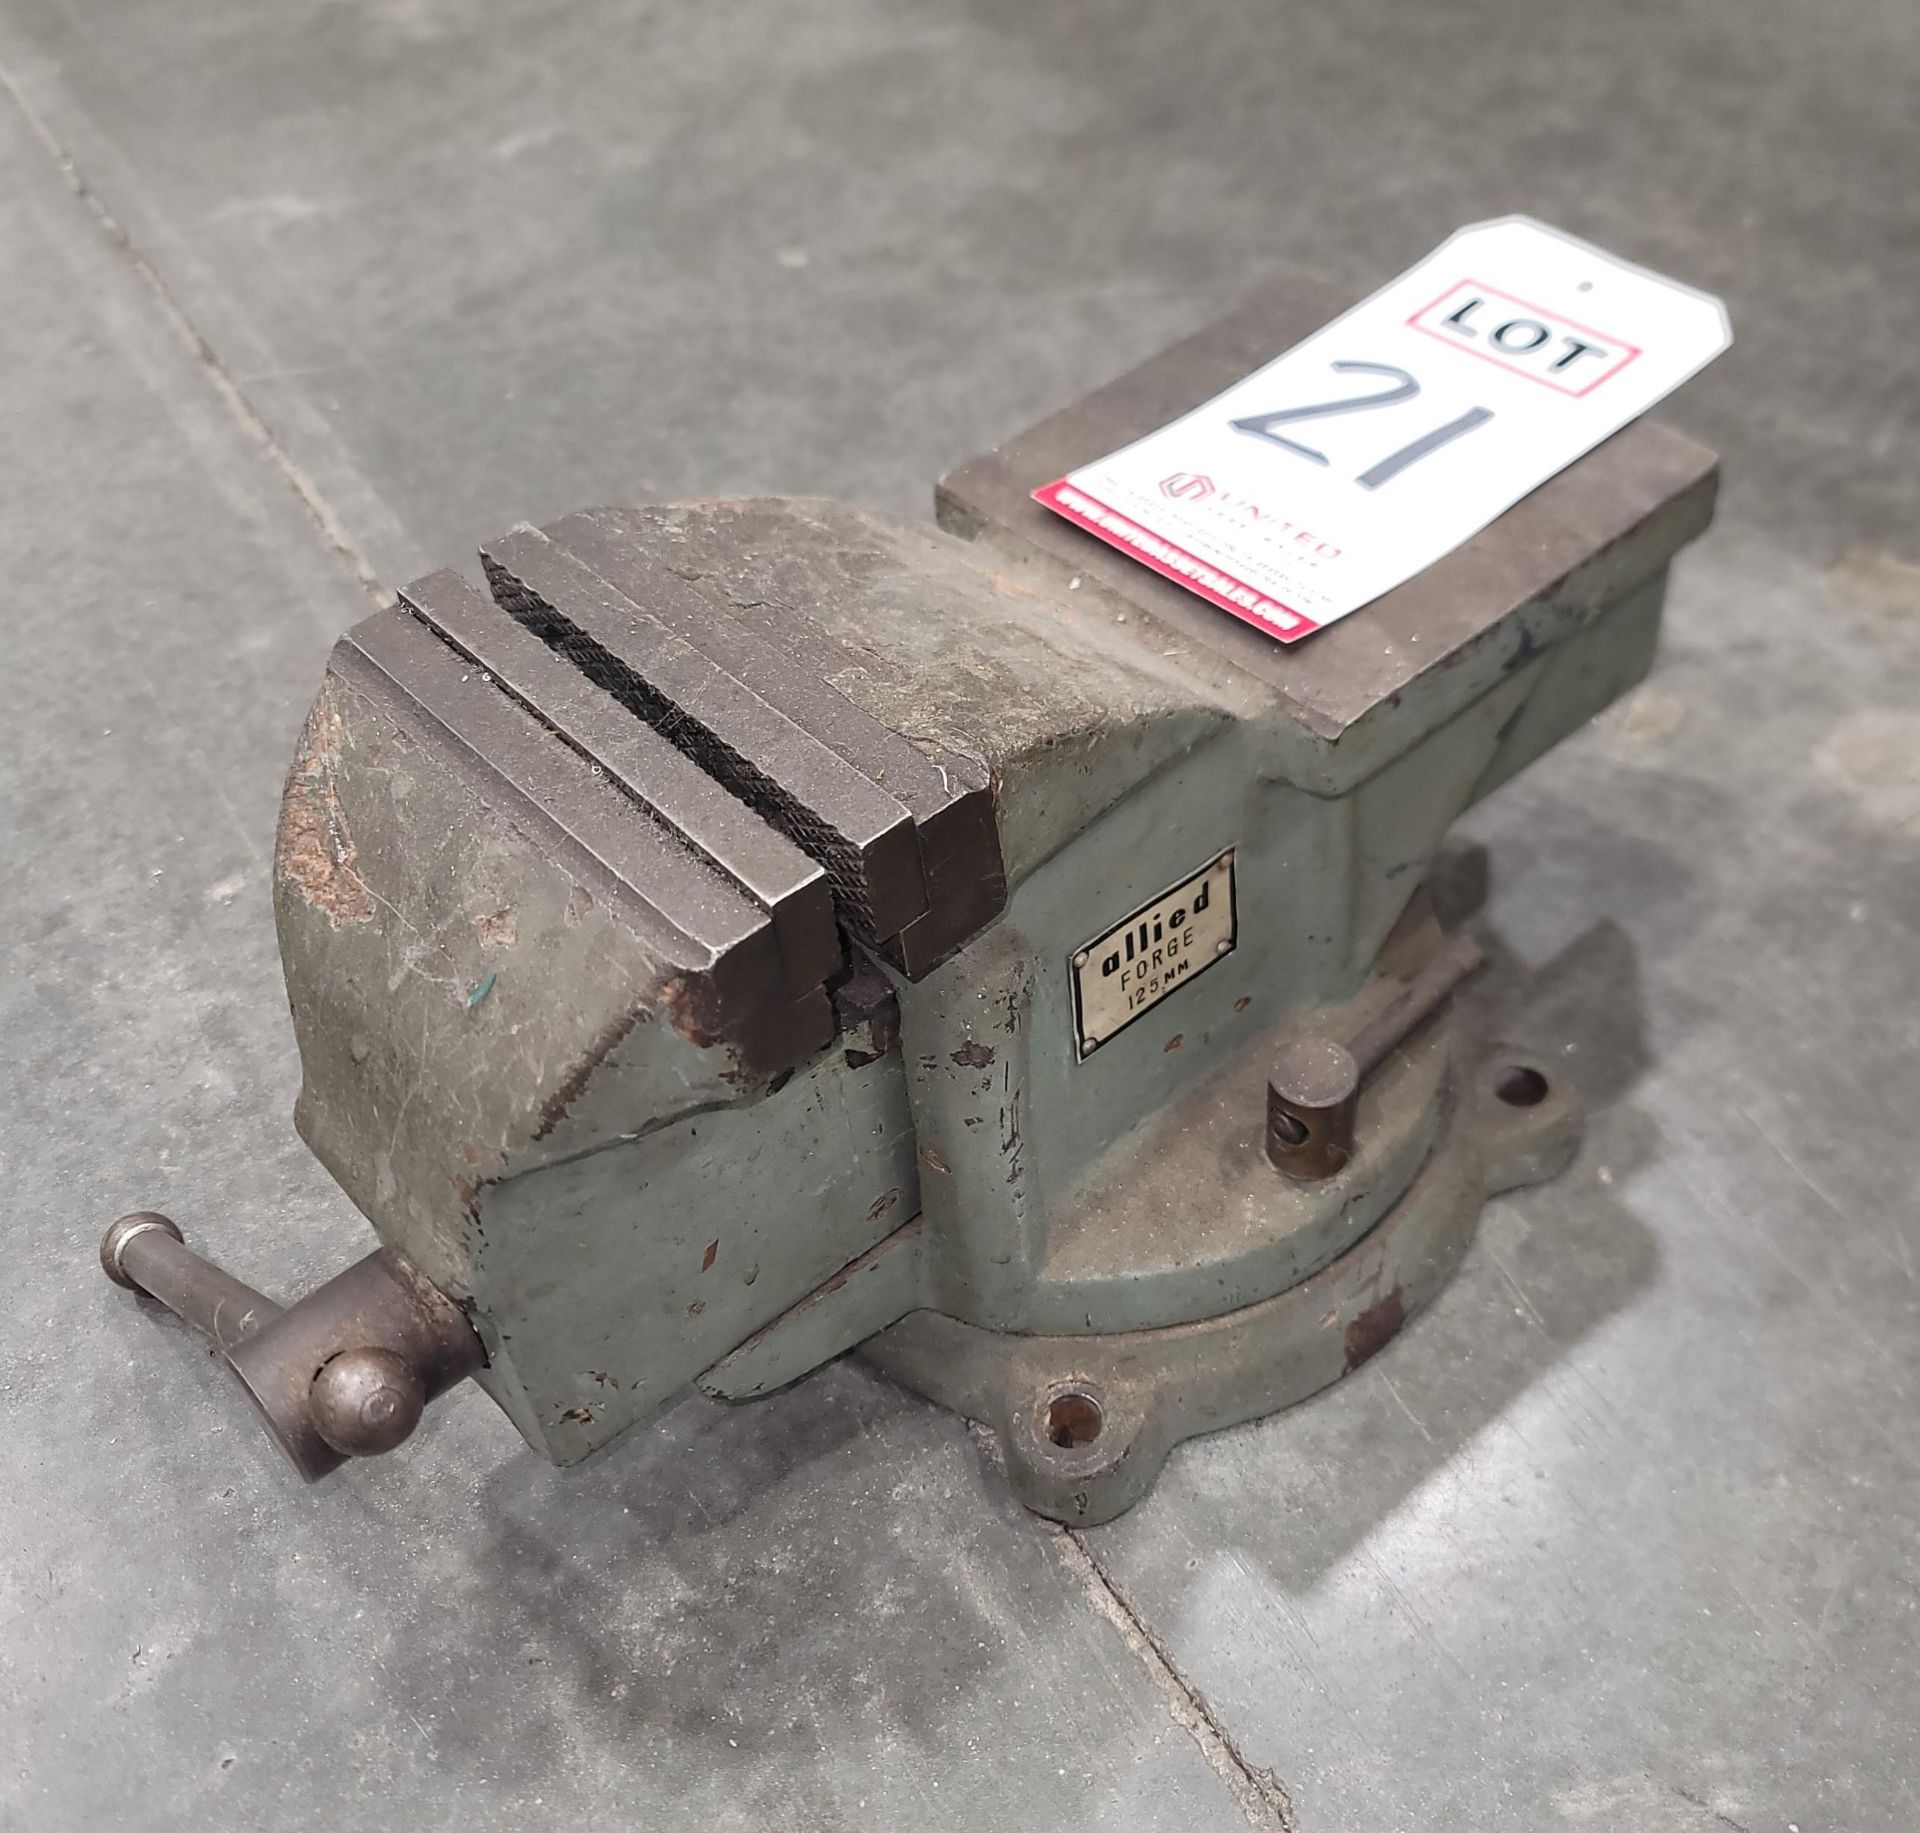 ALLIED FORGE 5" BENCH VISE W/ SWIVEL BASE